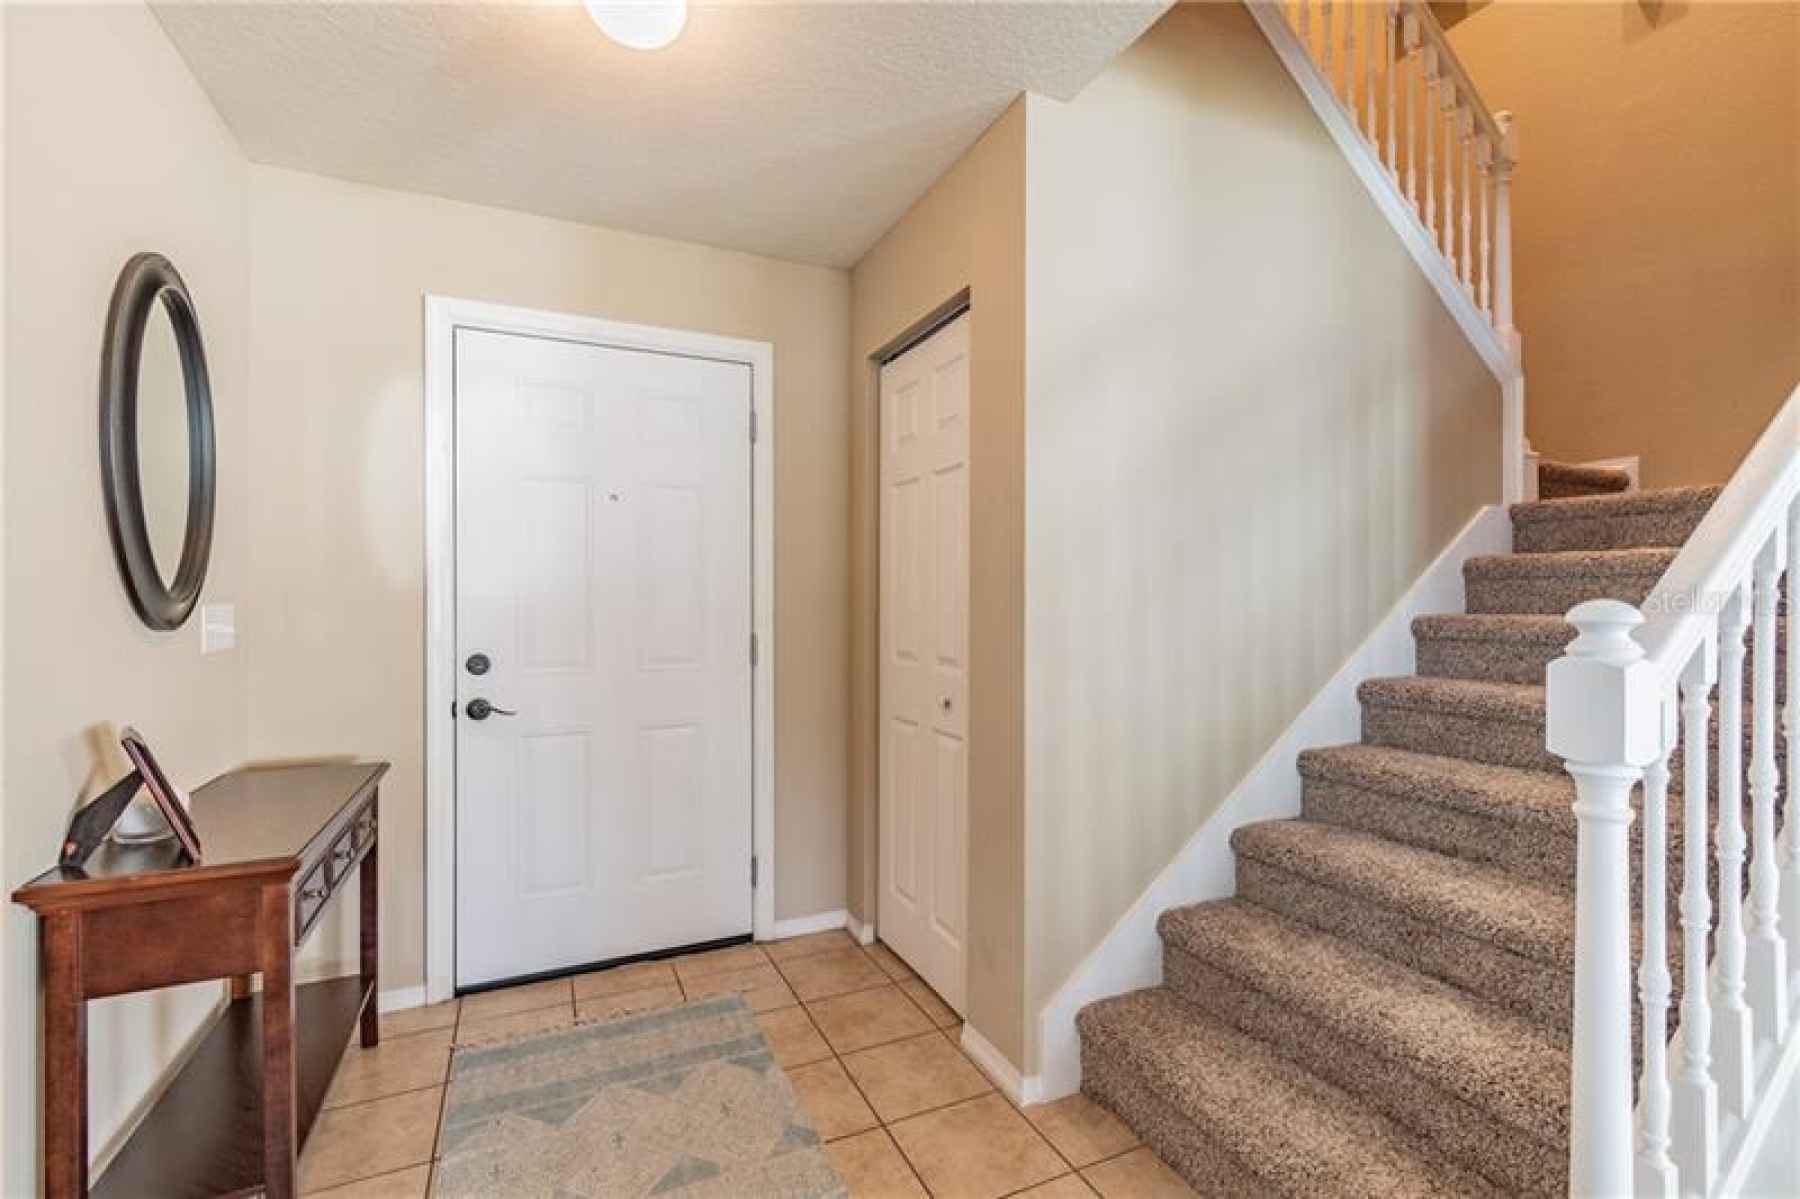 Entry Way is Tiled, Large under stairs Closet/storage. Brand new carpeting on the stairs